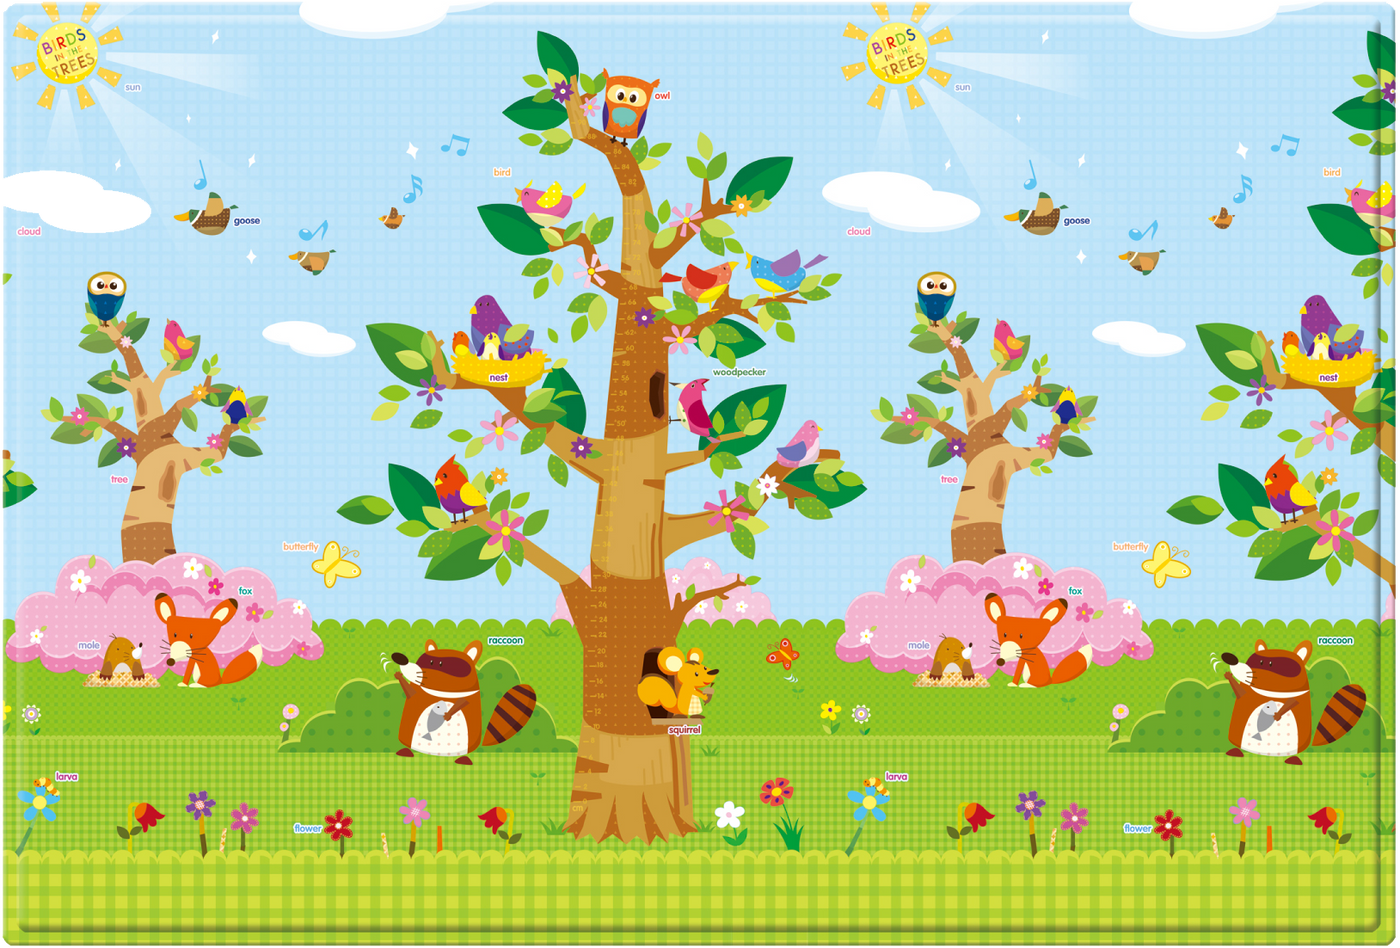 Baby Care Playmat - Birds in the Trees - Large Playmat